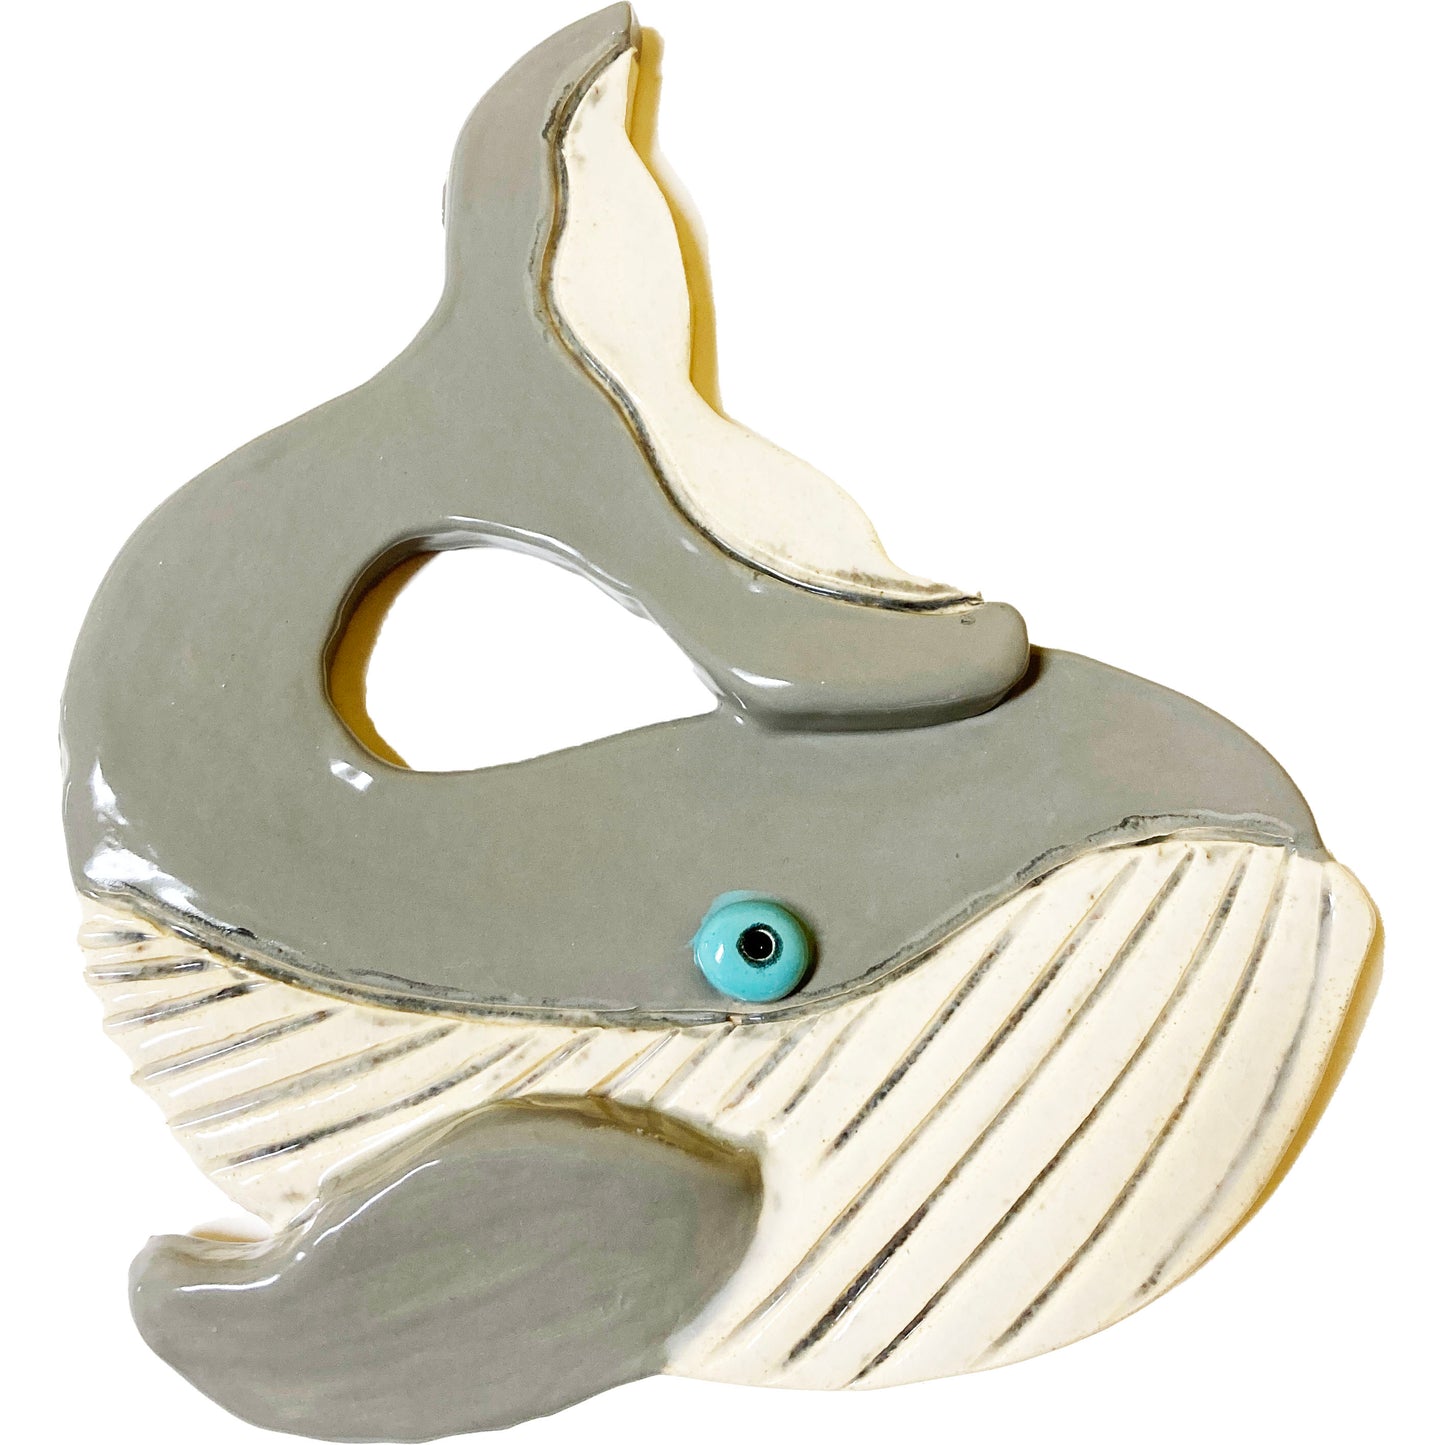 WATCH Resources Art Guild - Ceramic Arts Handmade Clay Crafts Fresh Fish 8-inch x 7-inch Glazed Whale made by Lisa Uptain